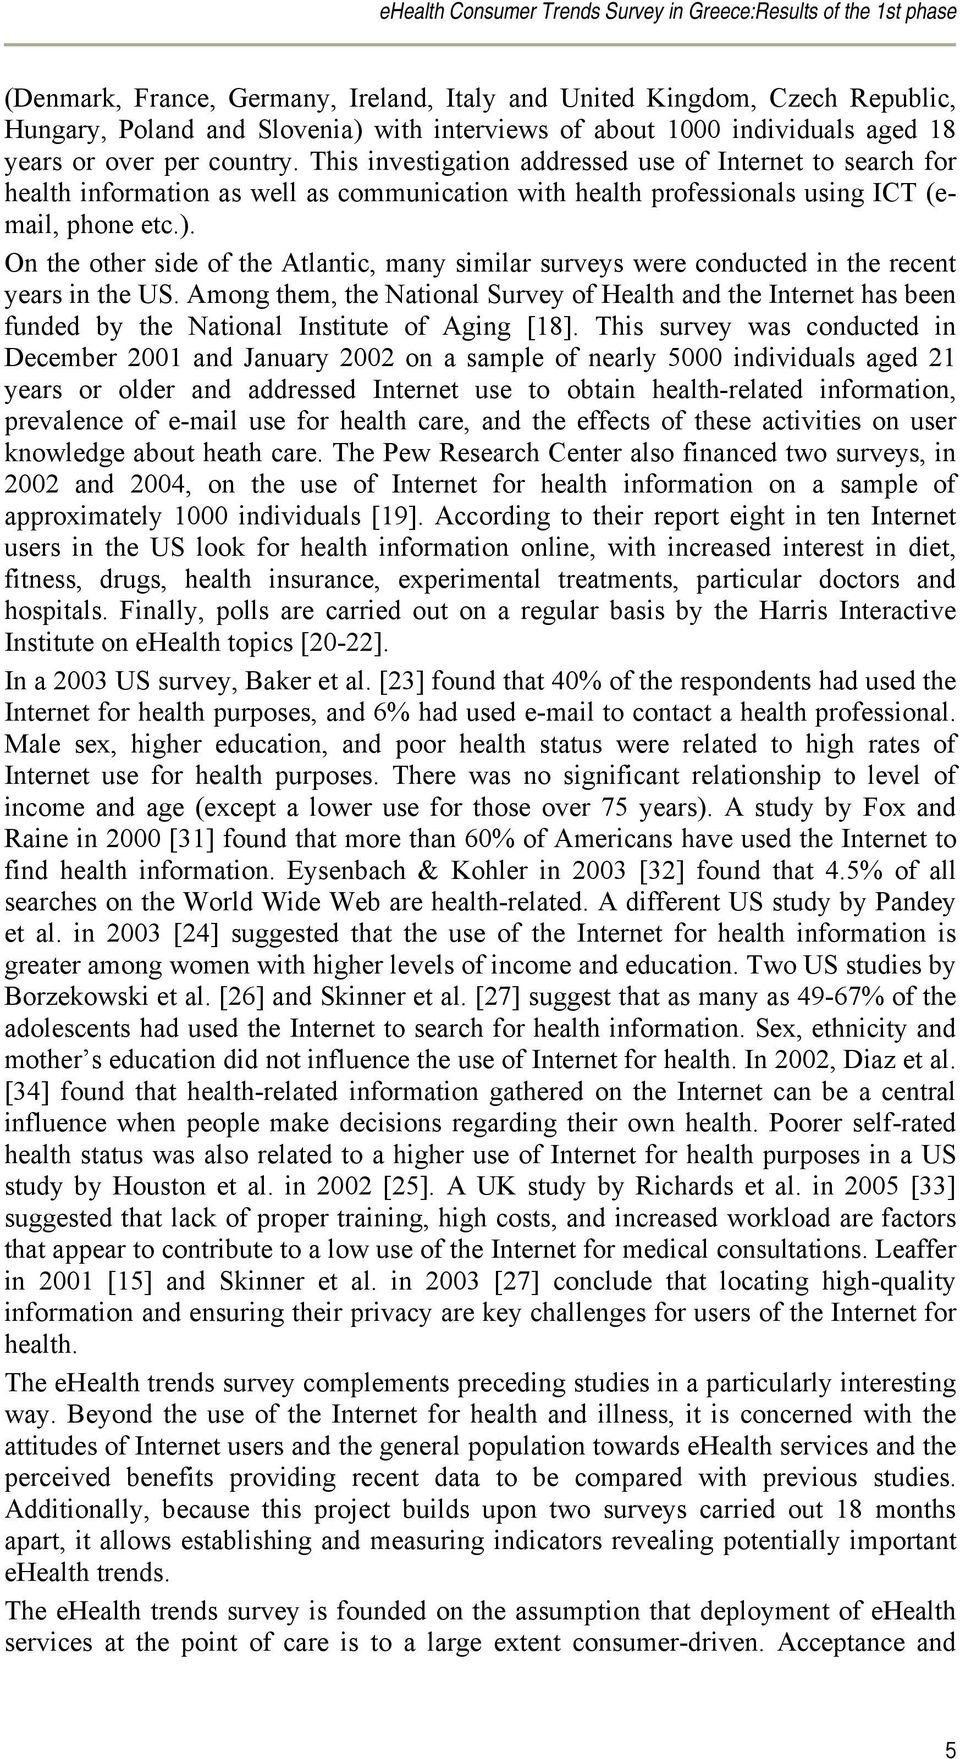 This investigation addressed use of Internet to search for health information as well as communication with health professionals using ICT (email, phone etc.).